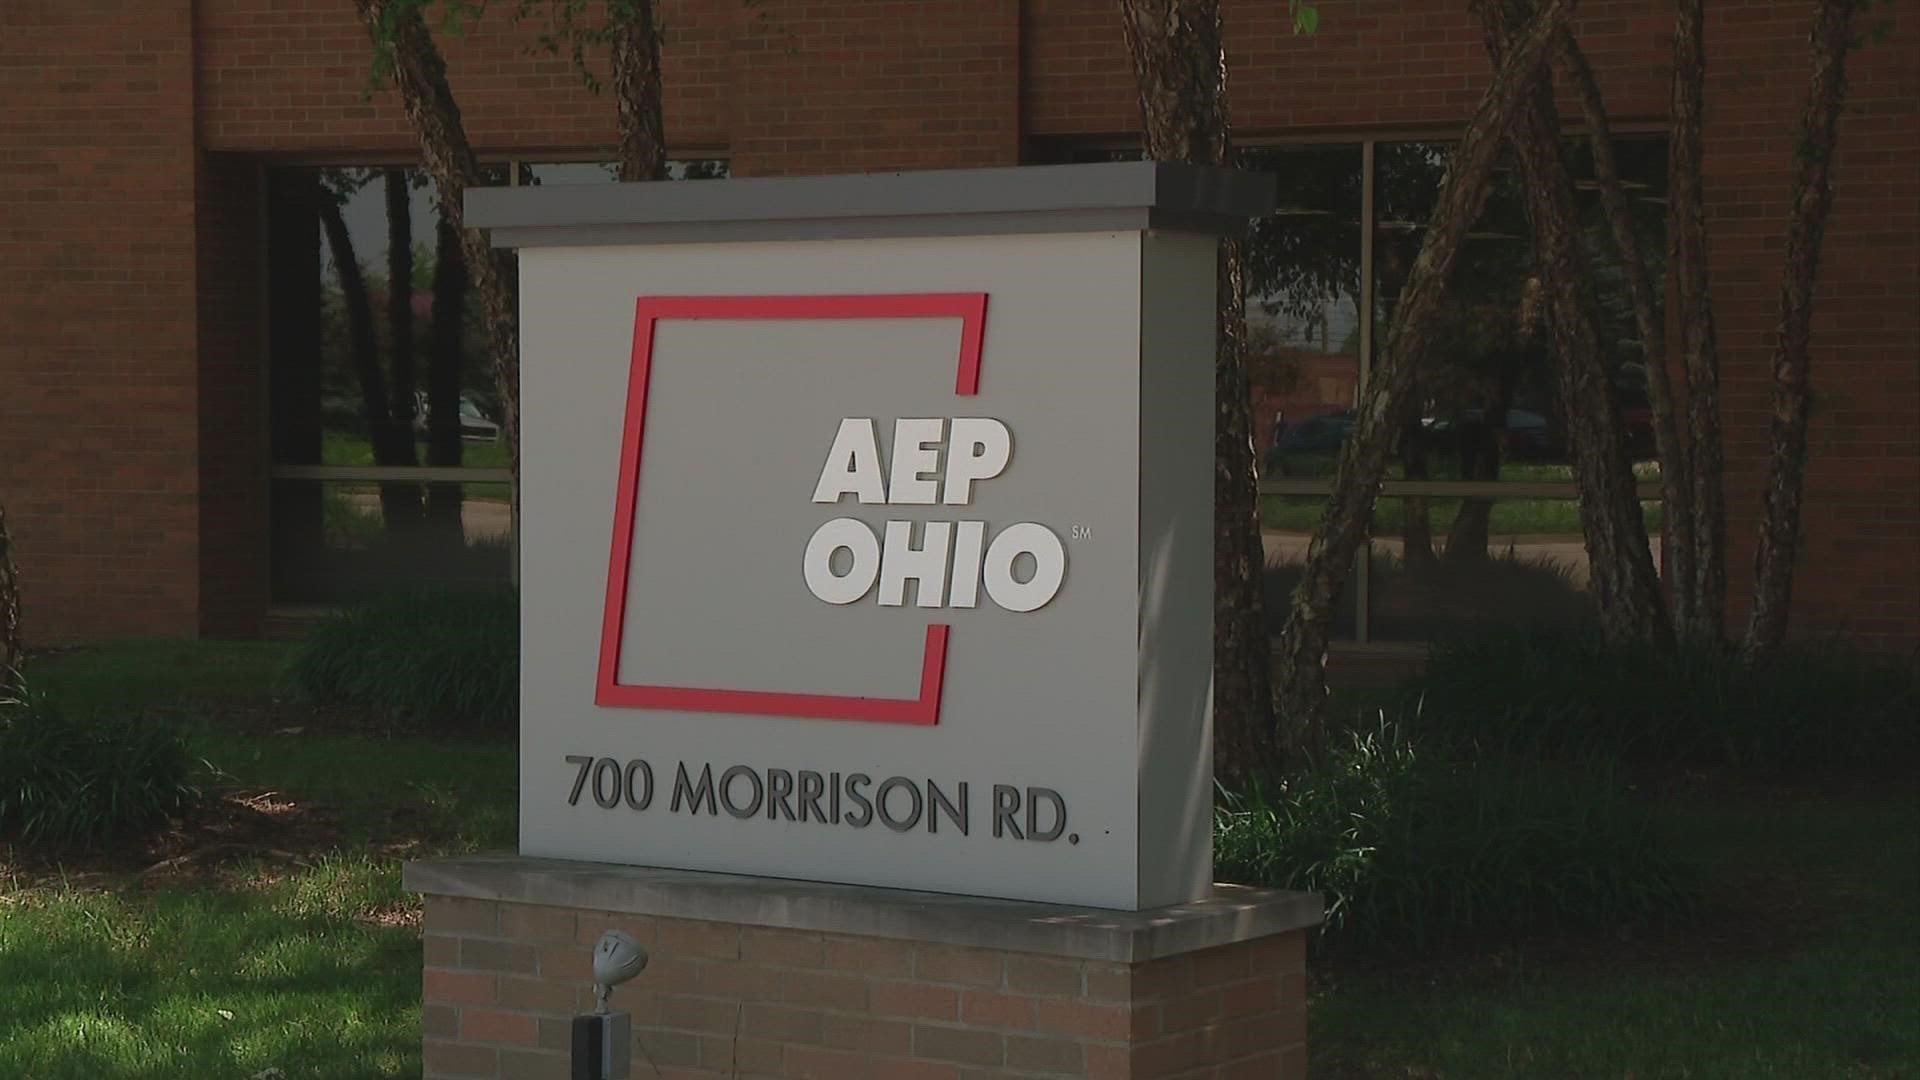 The question was raised by the Public Utilities Commission of Ohio.